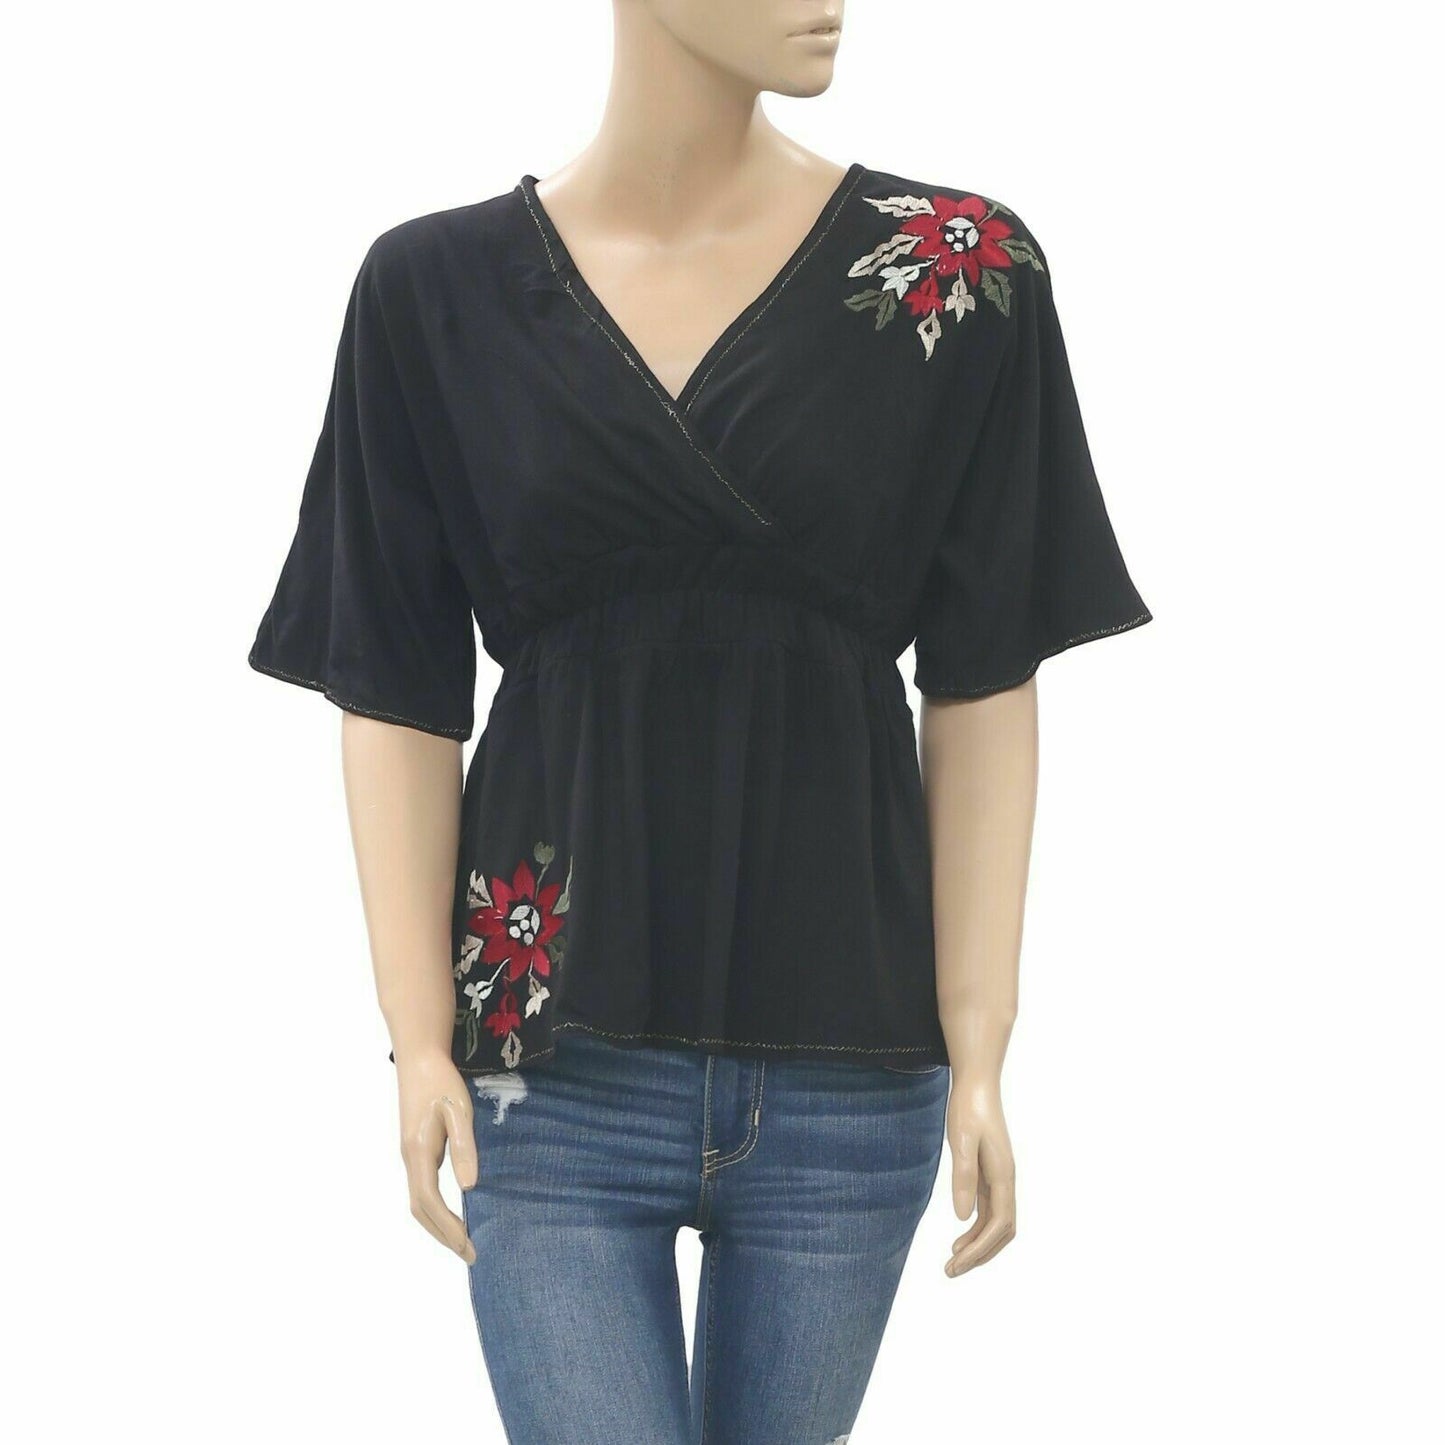 Caite Anthropologie Floral Embroidered Blouse Top Black